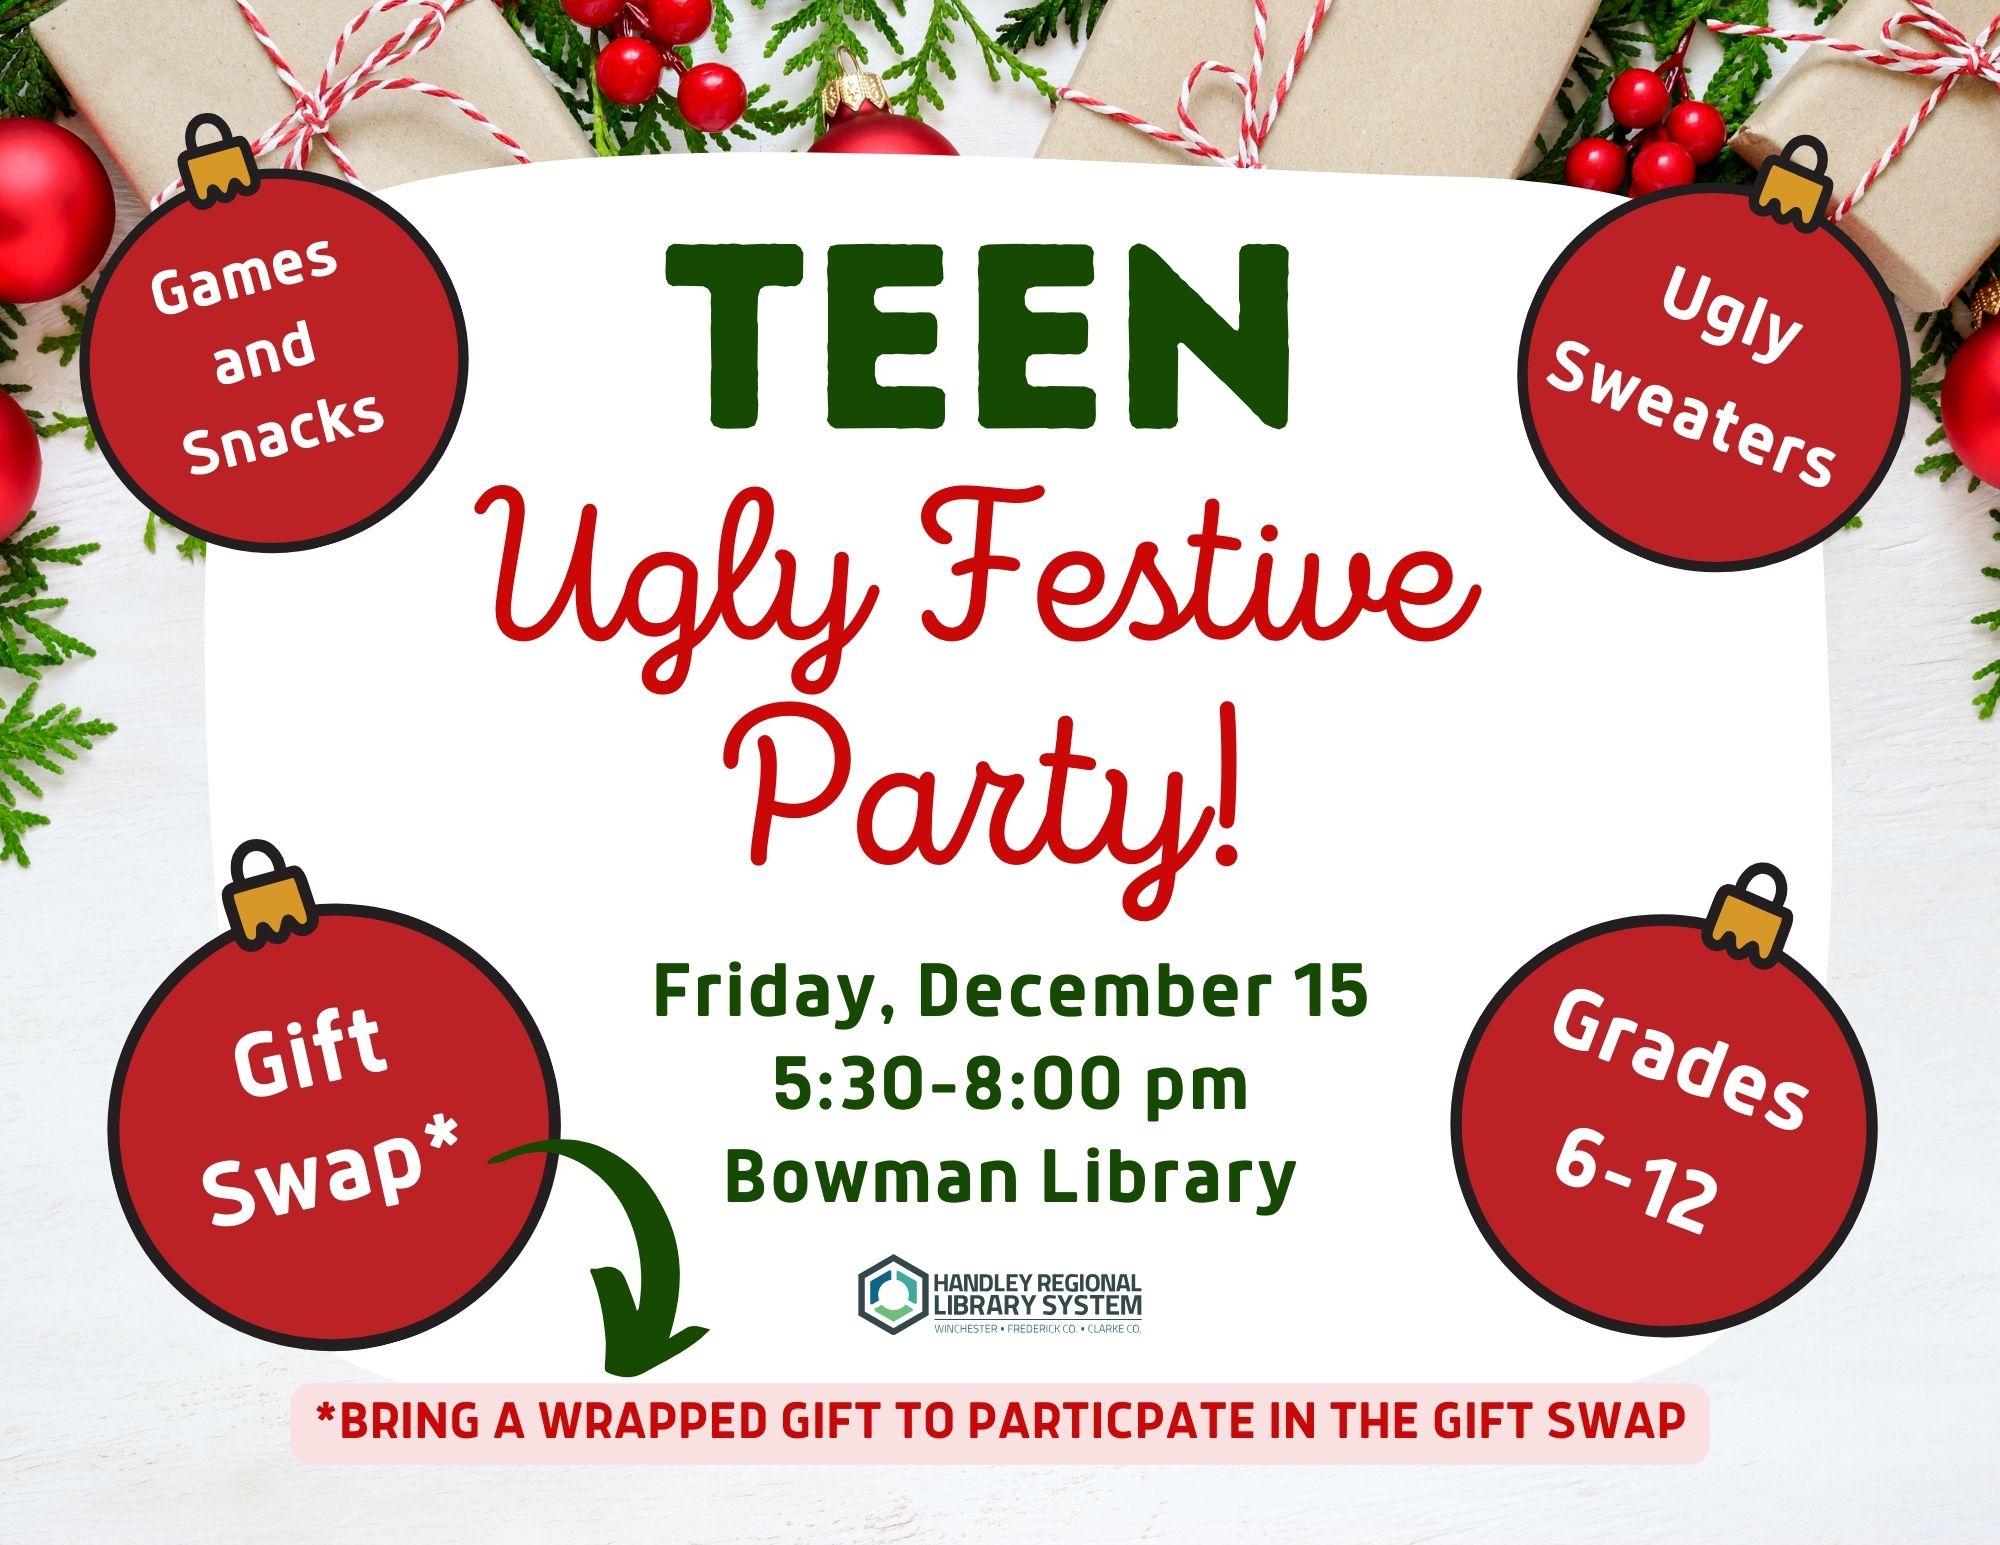 Teen Game Night Ugly Festive Party Poster